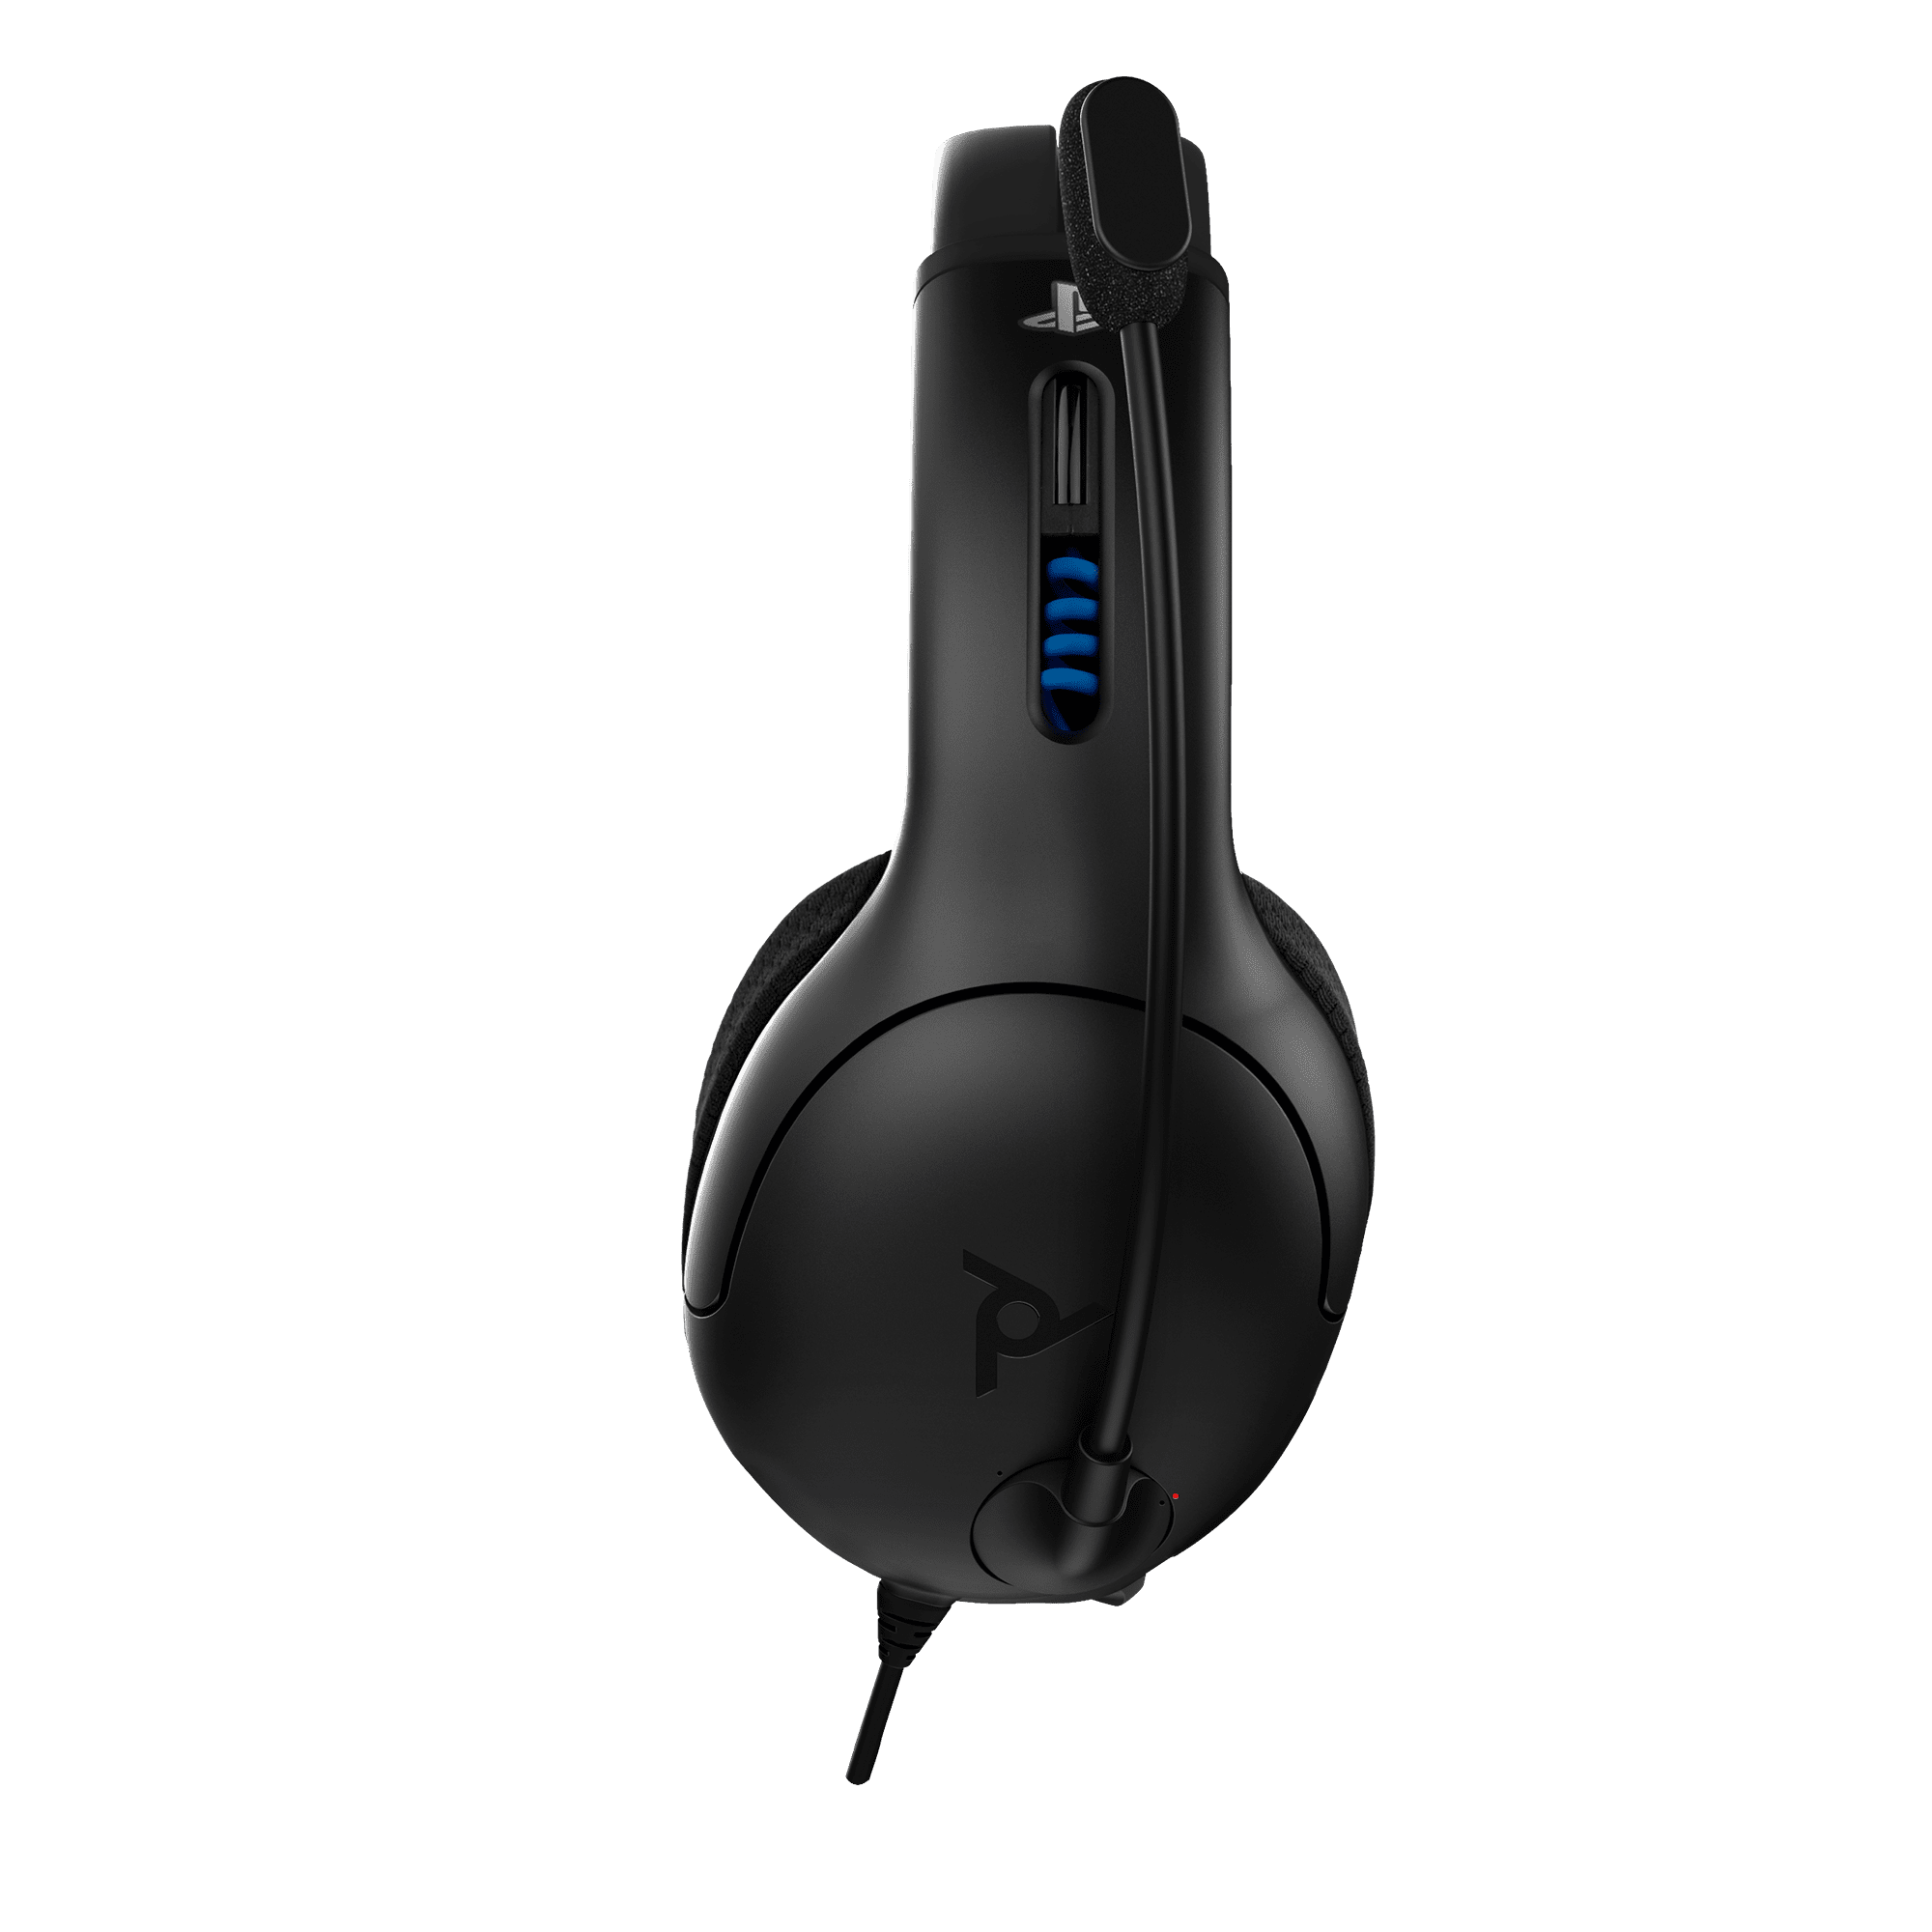 Need some help, I've got the PDP LVL50 headset and can't seem to get any  game audio. I've had this headset since the ps4 and everything worked on  there, switch to ps5